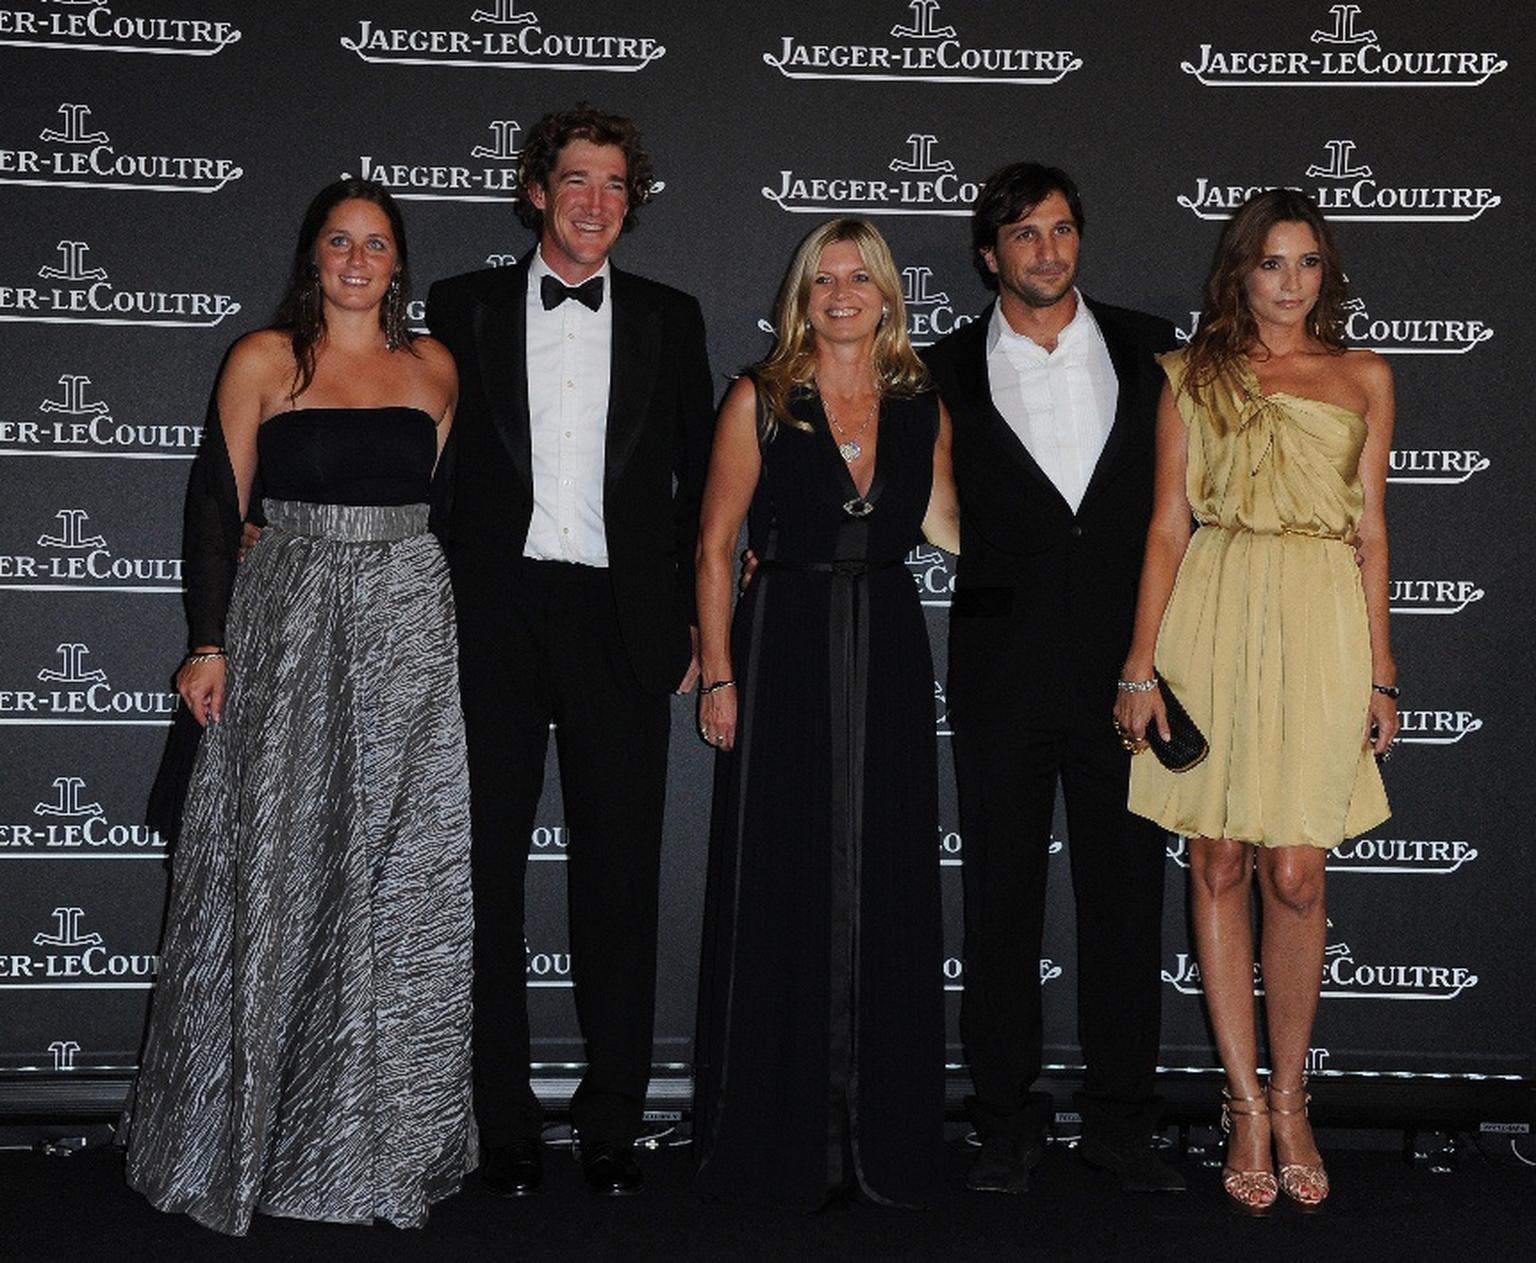 JLC-Luke-Tomlinson-with-his-fiancee marchioness-of-Milford-Haven-Eduardo-Novillo-Astrada-and-Astrid-Munoz-at-Jaeger-LeCoultre-Rendez-Vous-in-Venice.jpg